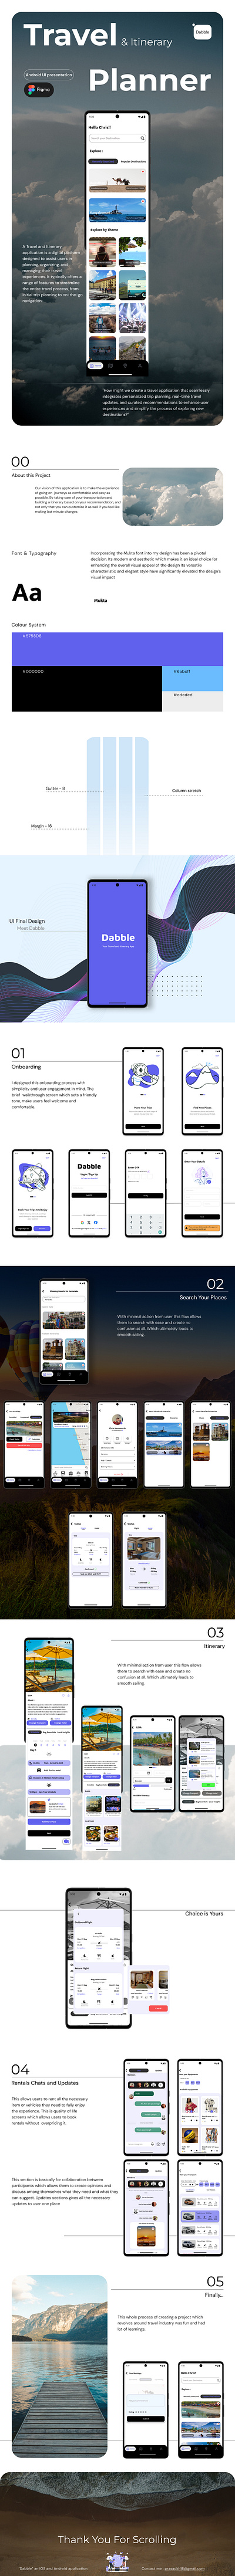 Android Presentation - Travel and Itinerary planner android android presentation design portfolio ui uiux